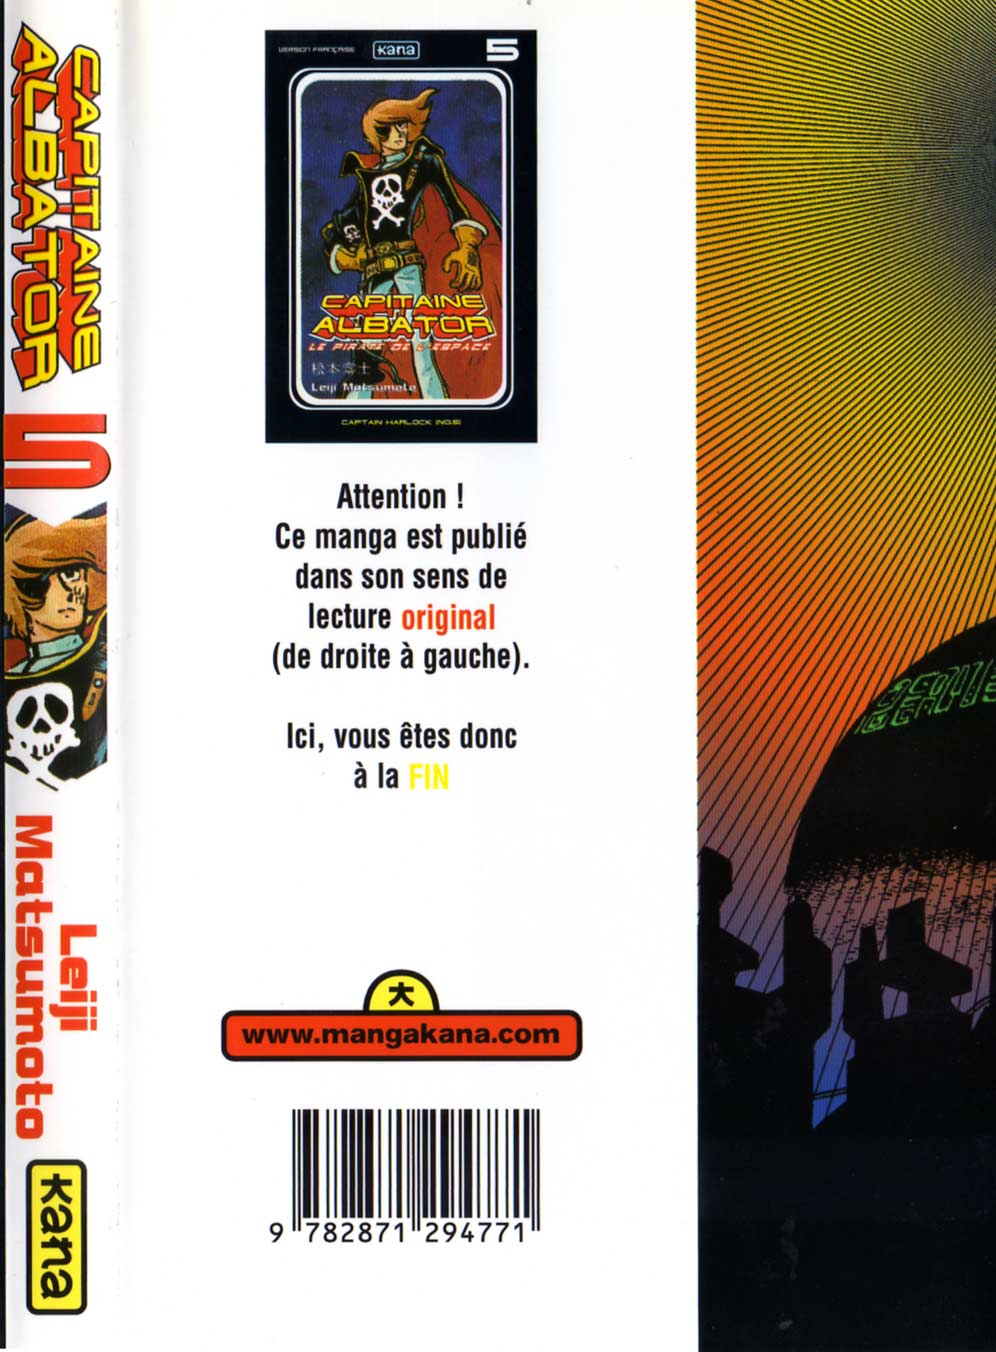 Tome 5 : Capitaine Albator (couverture dos)